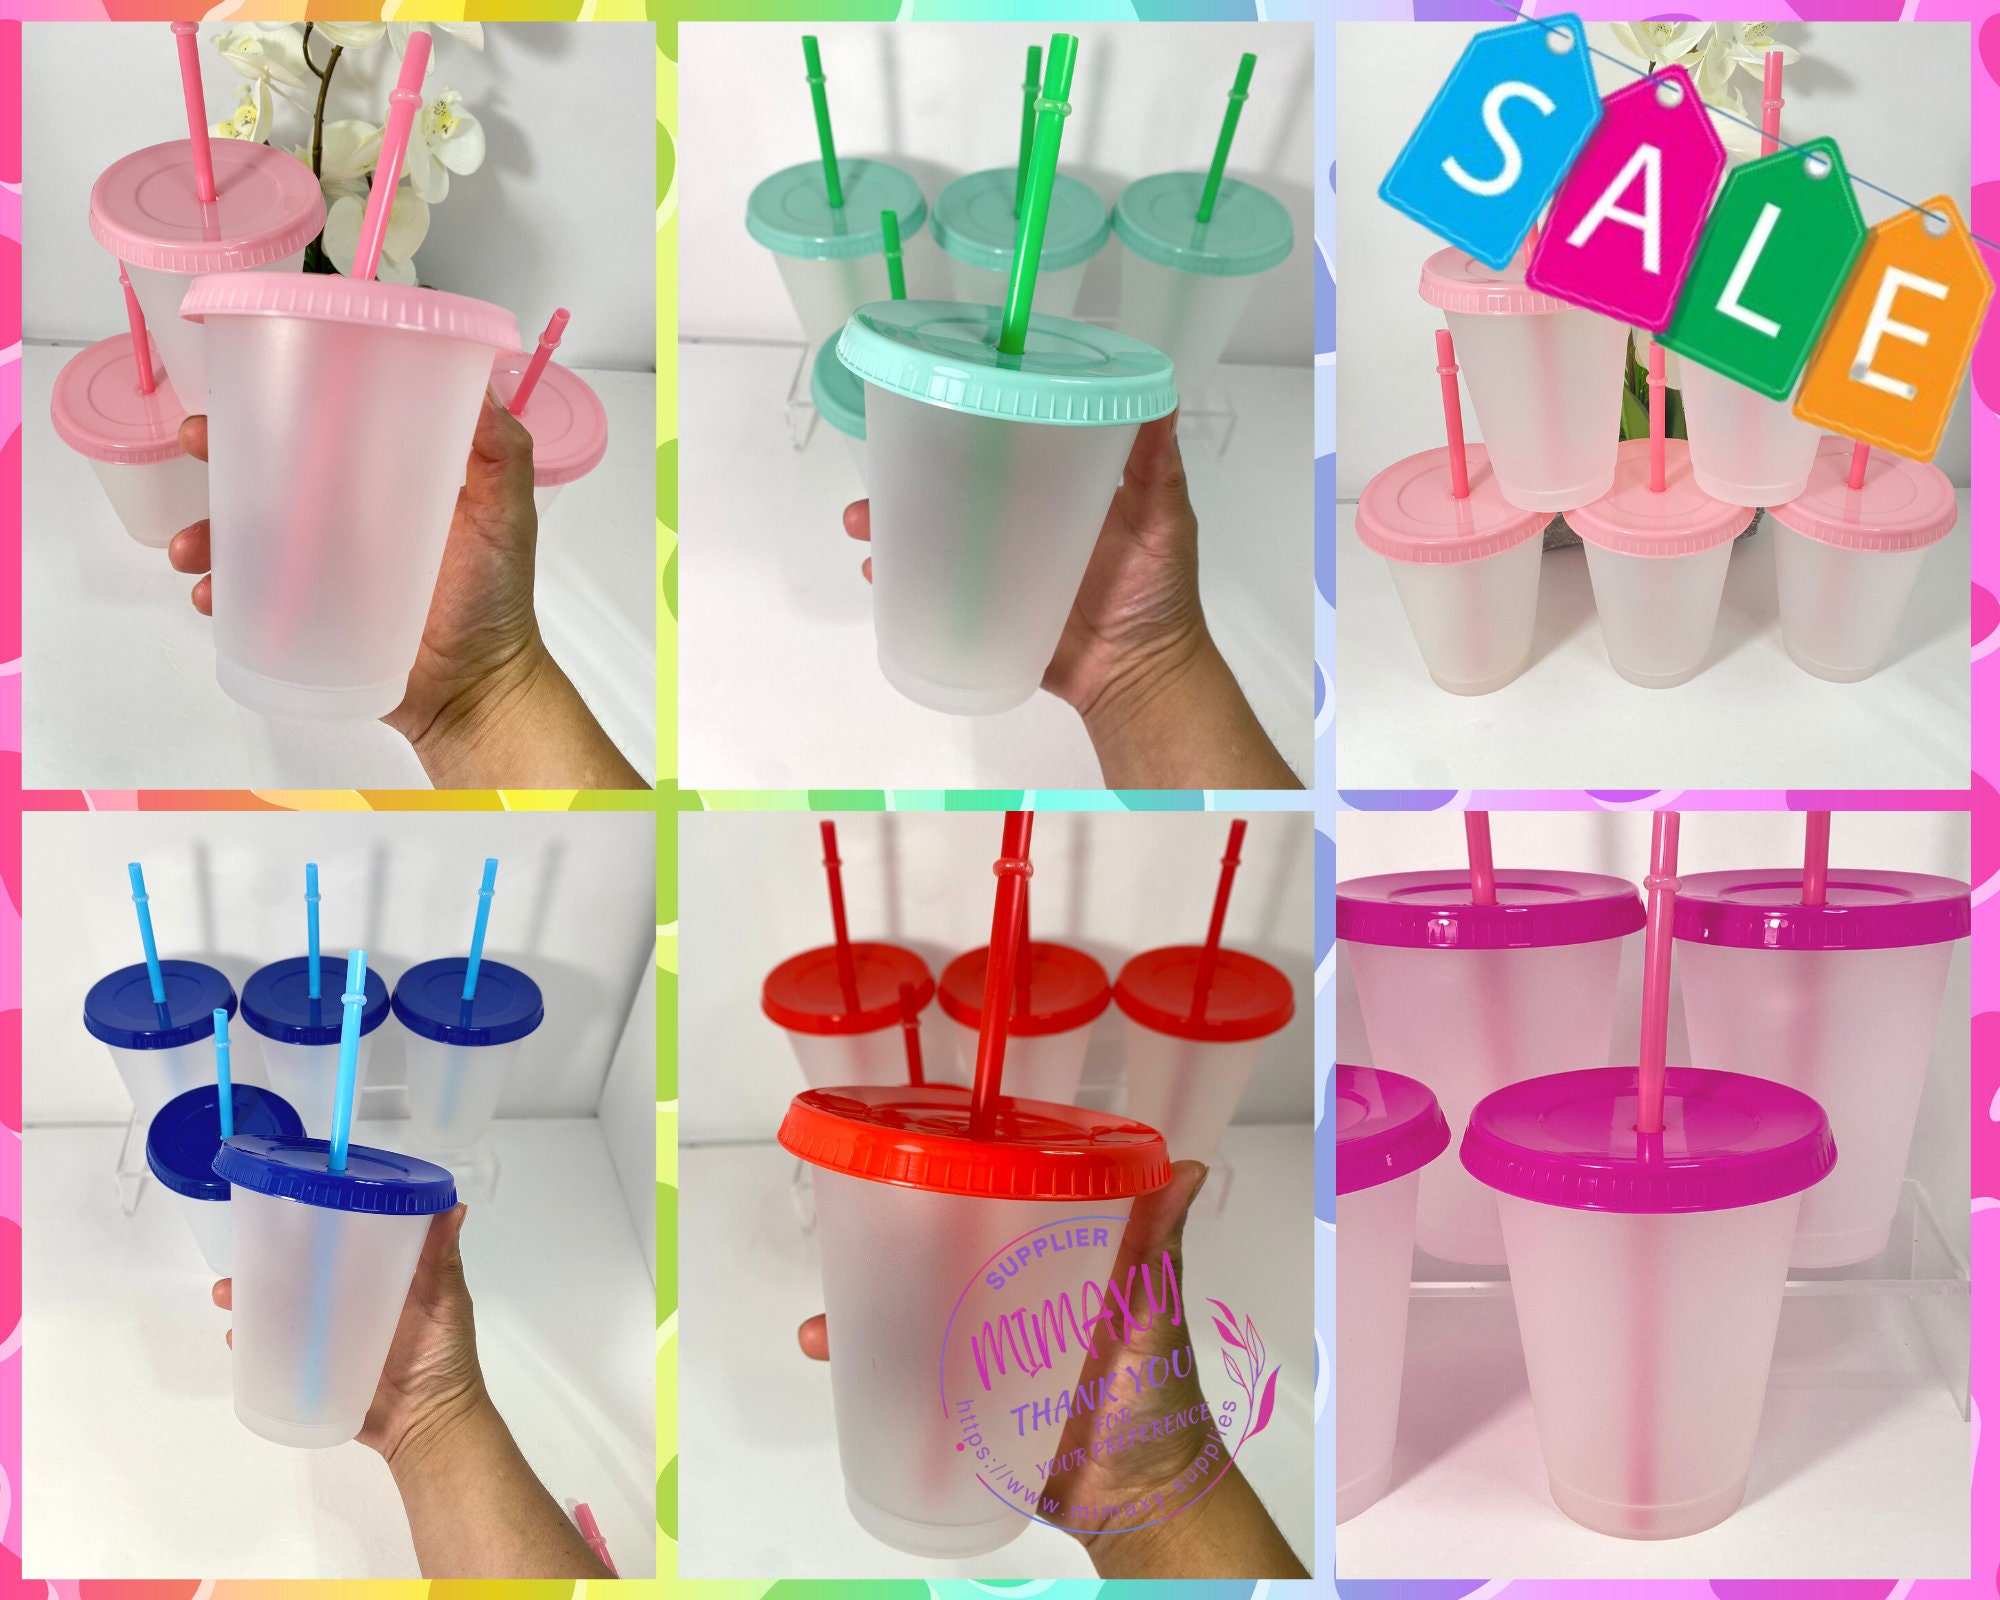 Youngever 7 Sets 11OZ Plastic Kids Cups with Lids and Straws